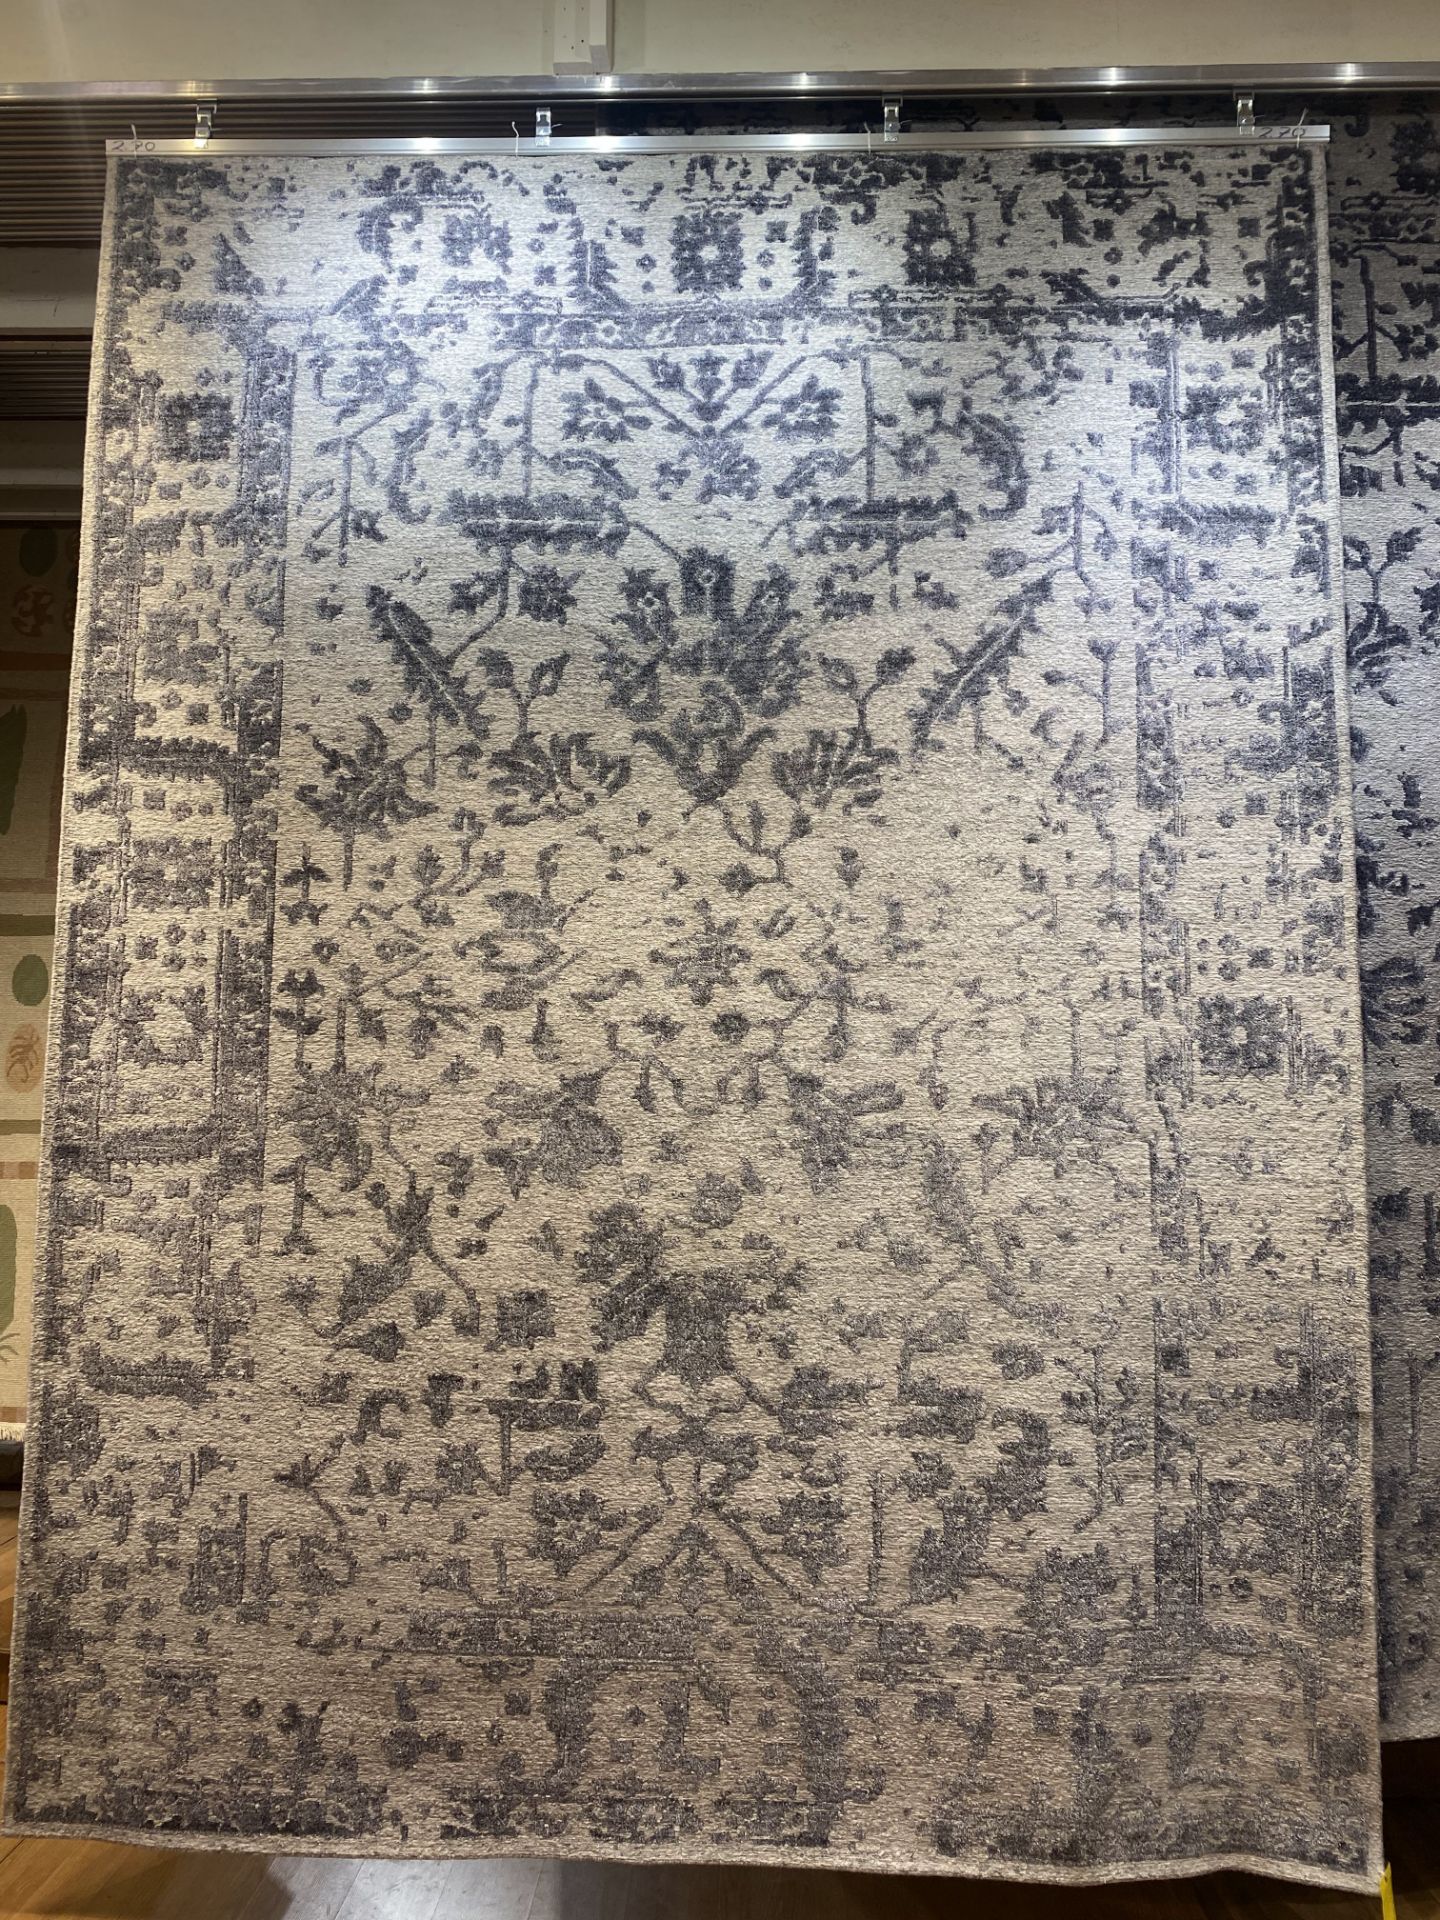 9' X 12' ART. SILK HAND KNOTTED IN INDIA - MSRP $5,779.00 - INVENTORY CODE: MROW2695GRBK